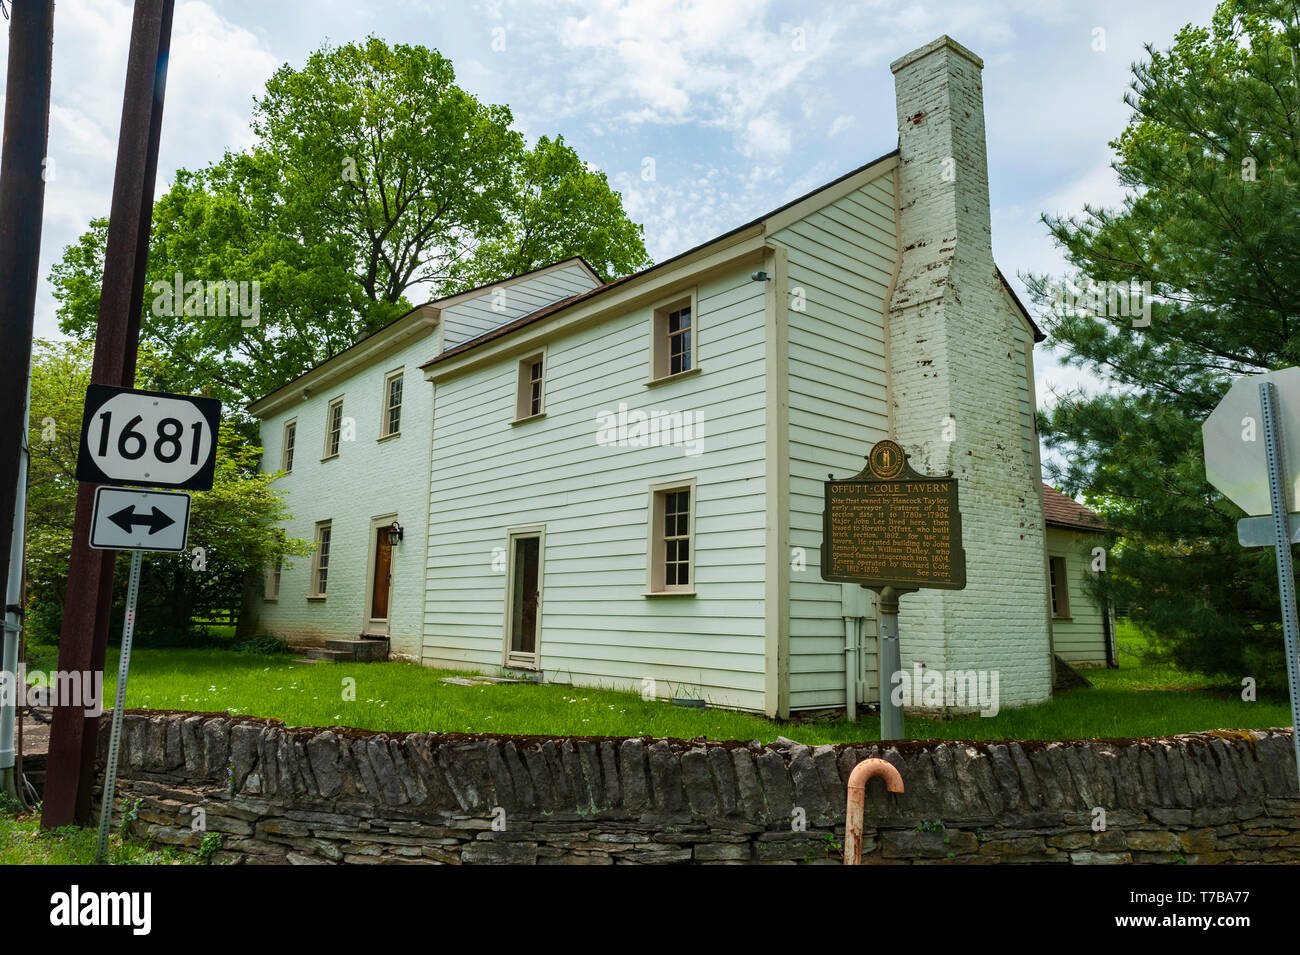 Offut-Cole Tavern a Woodford County Kentucky Foto Stock